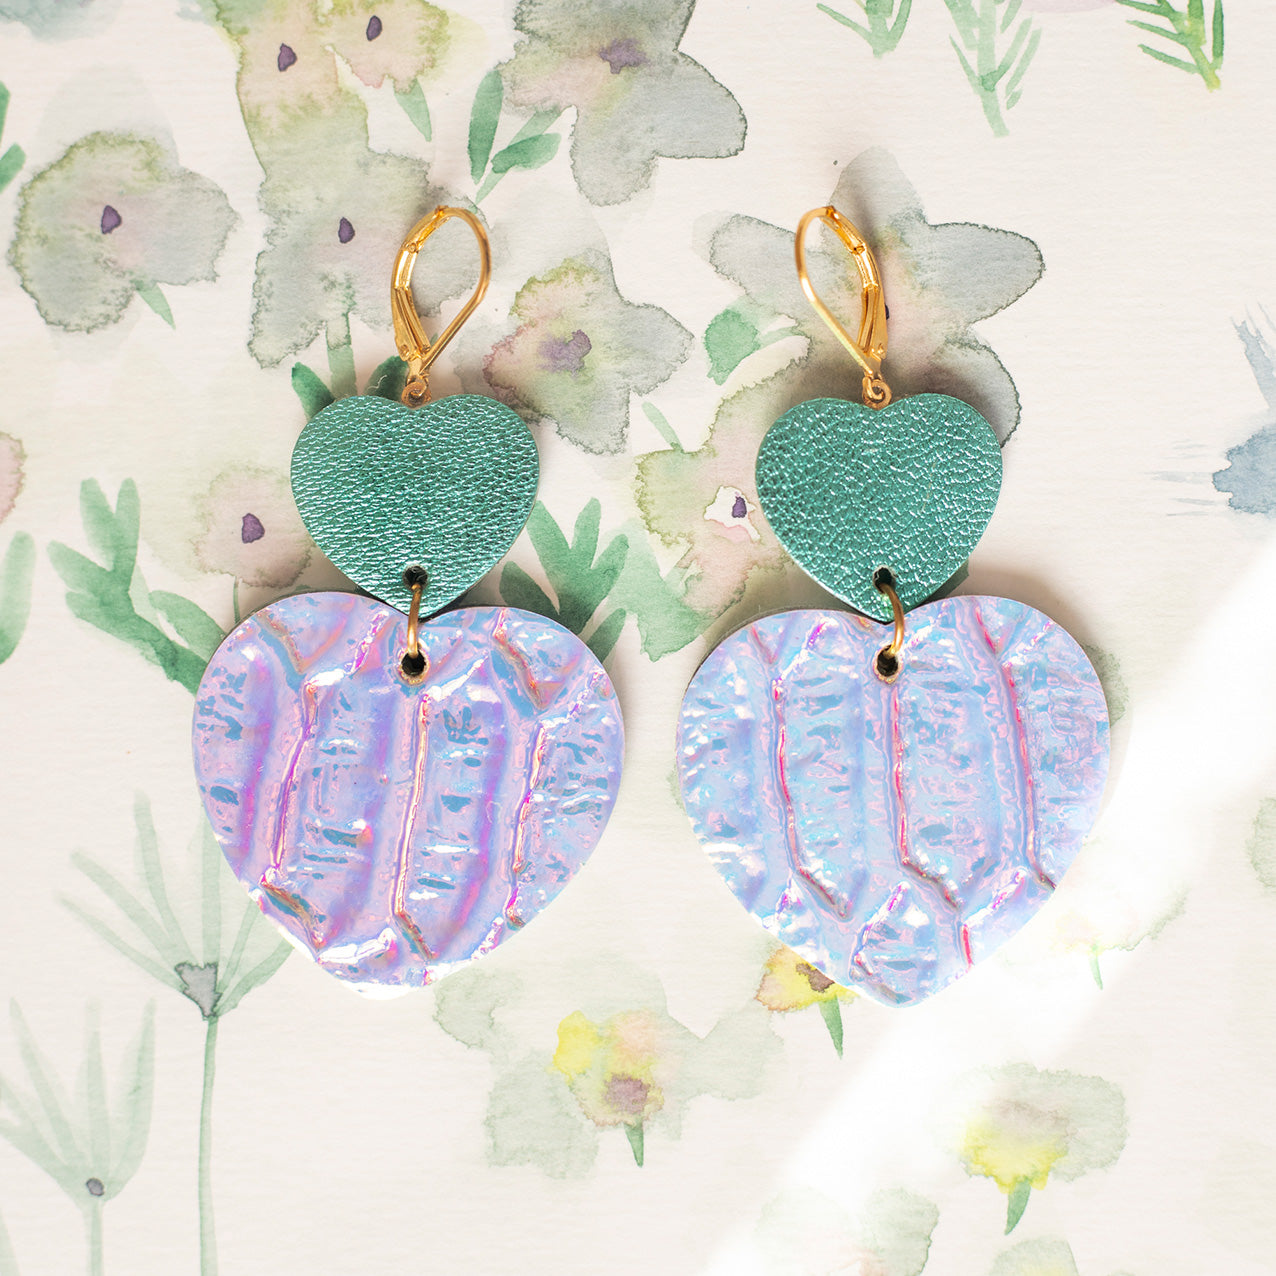 Double Hearts earrings - metallic turquoise leather and light blue holographic